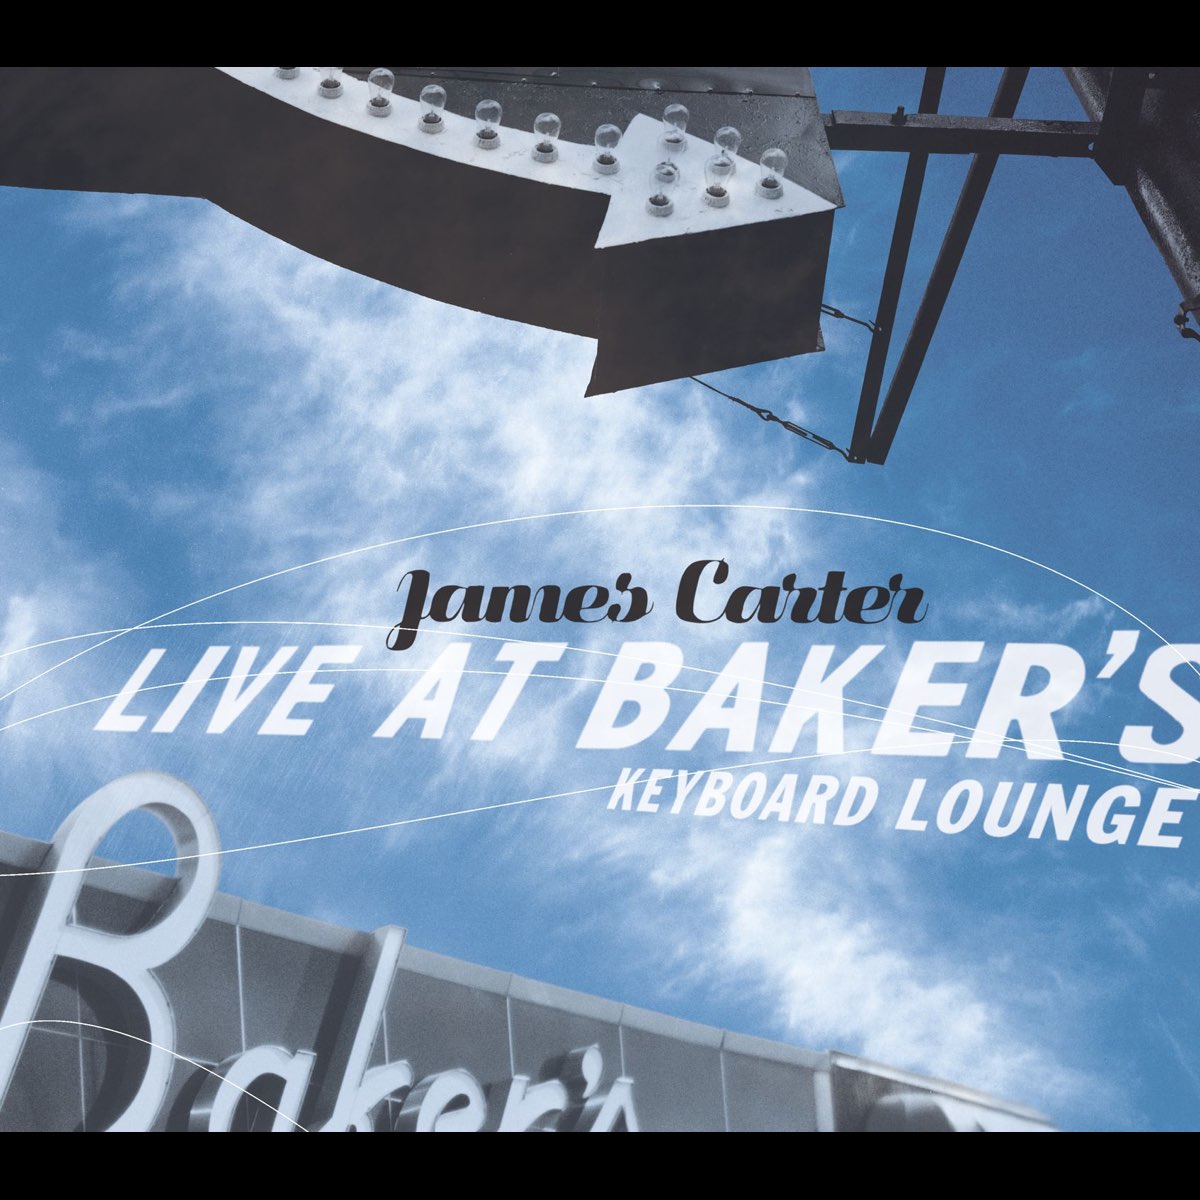 ‎Live At Baker's Keyboard Lounge by James Carter on Apple Music